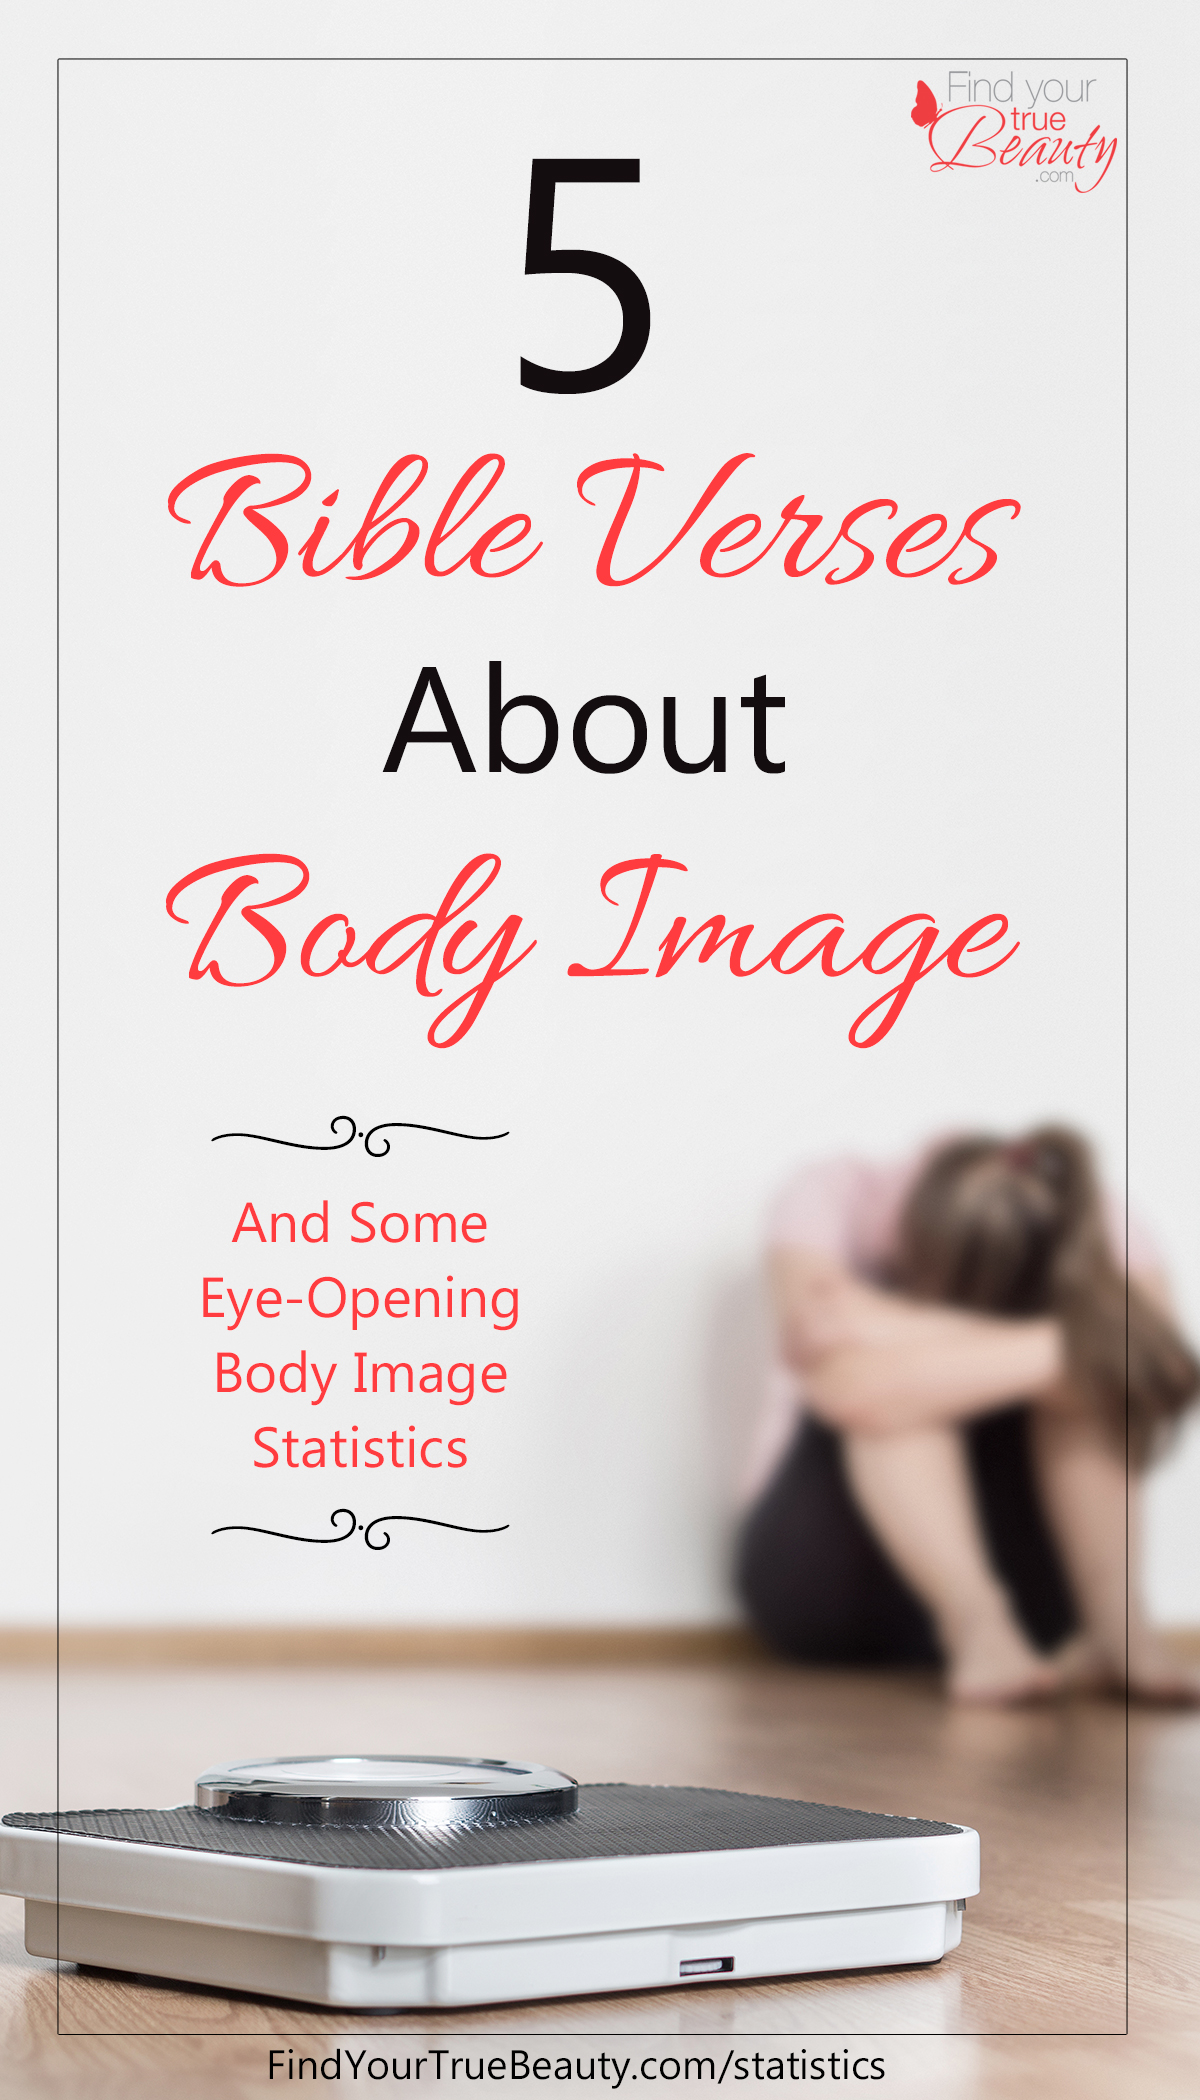 5 Bible verses about body image